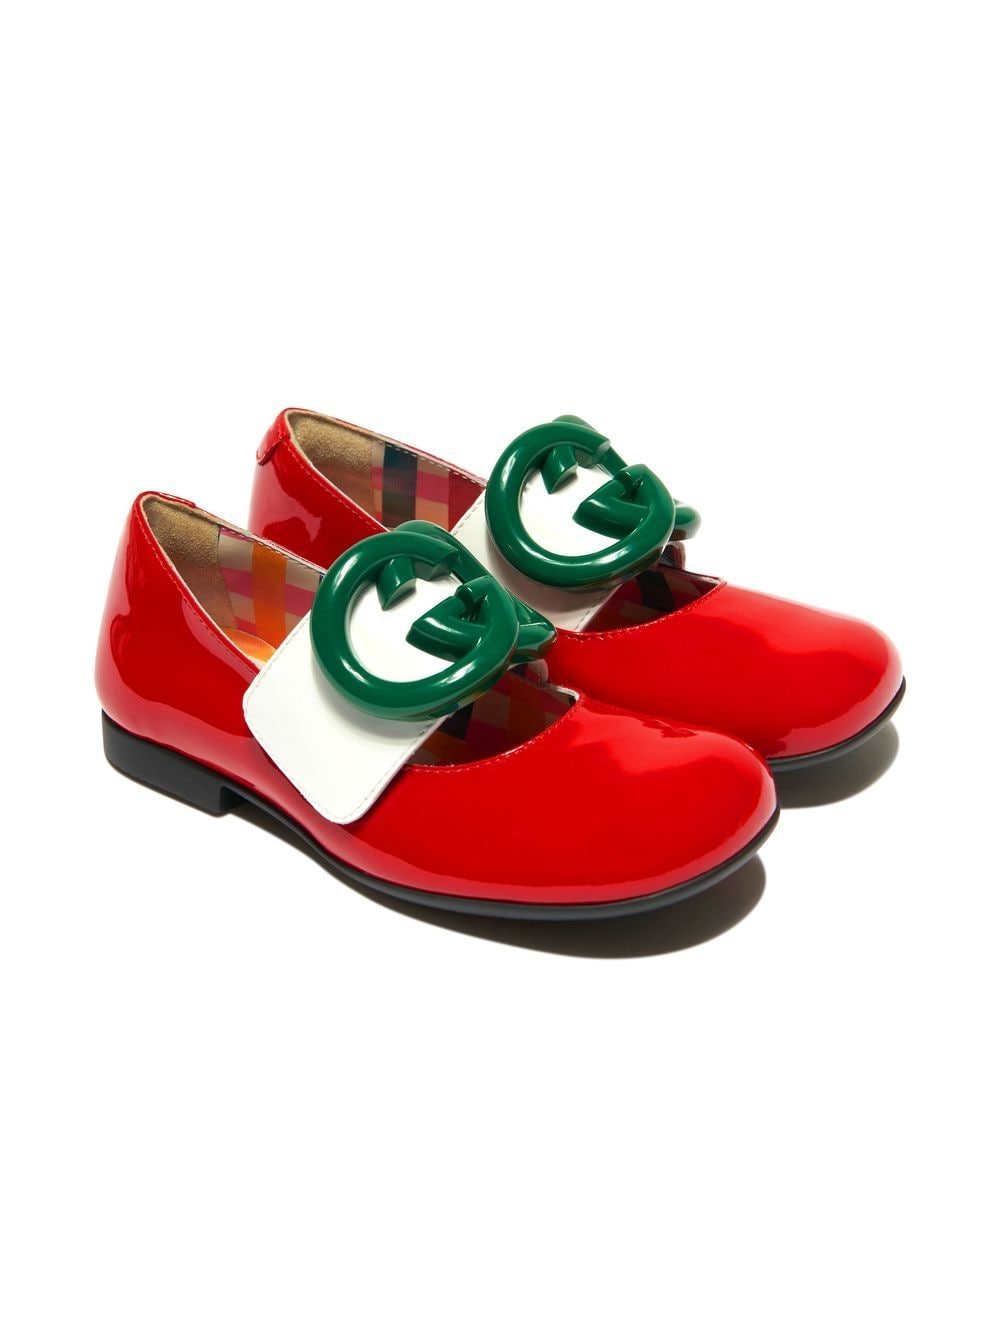 Mew Mew muur paars Gucci Kids GG Band Leather Ballerina Shoes - Farfetch